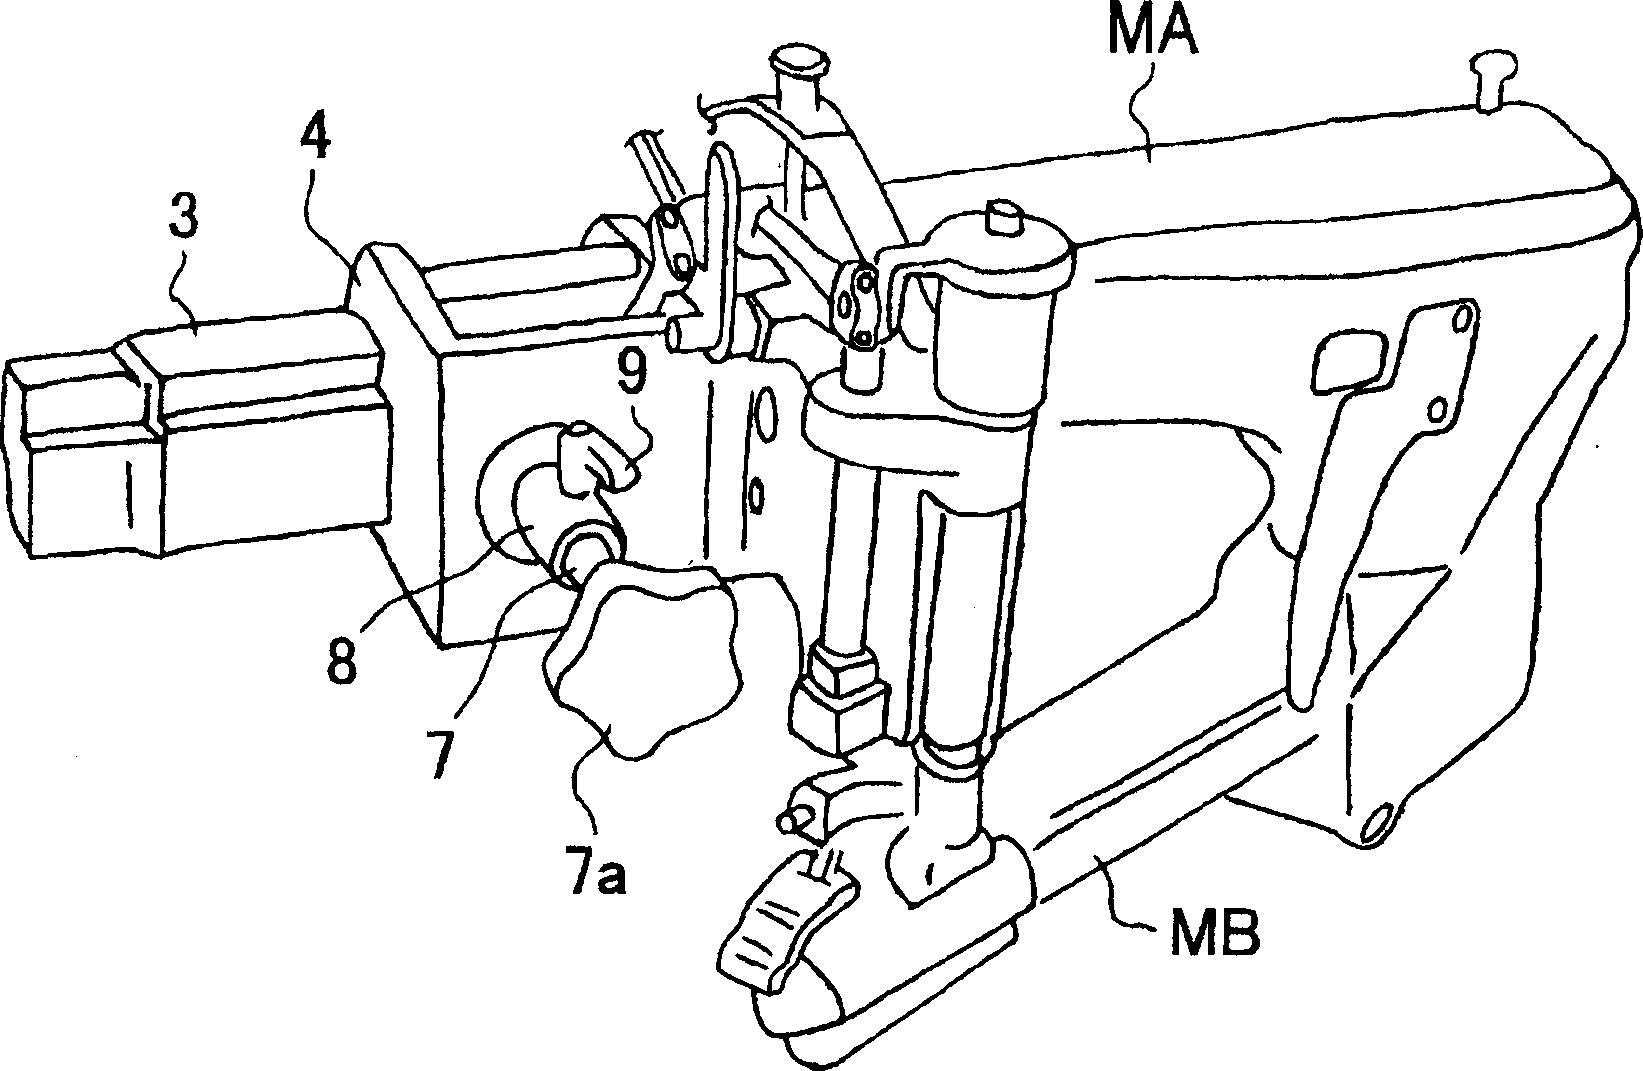 Manual rotary devices of sewing machines